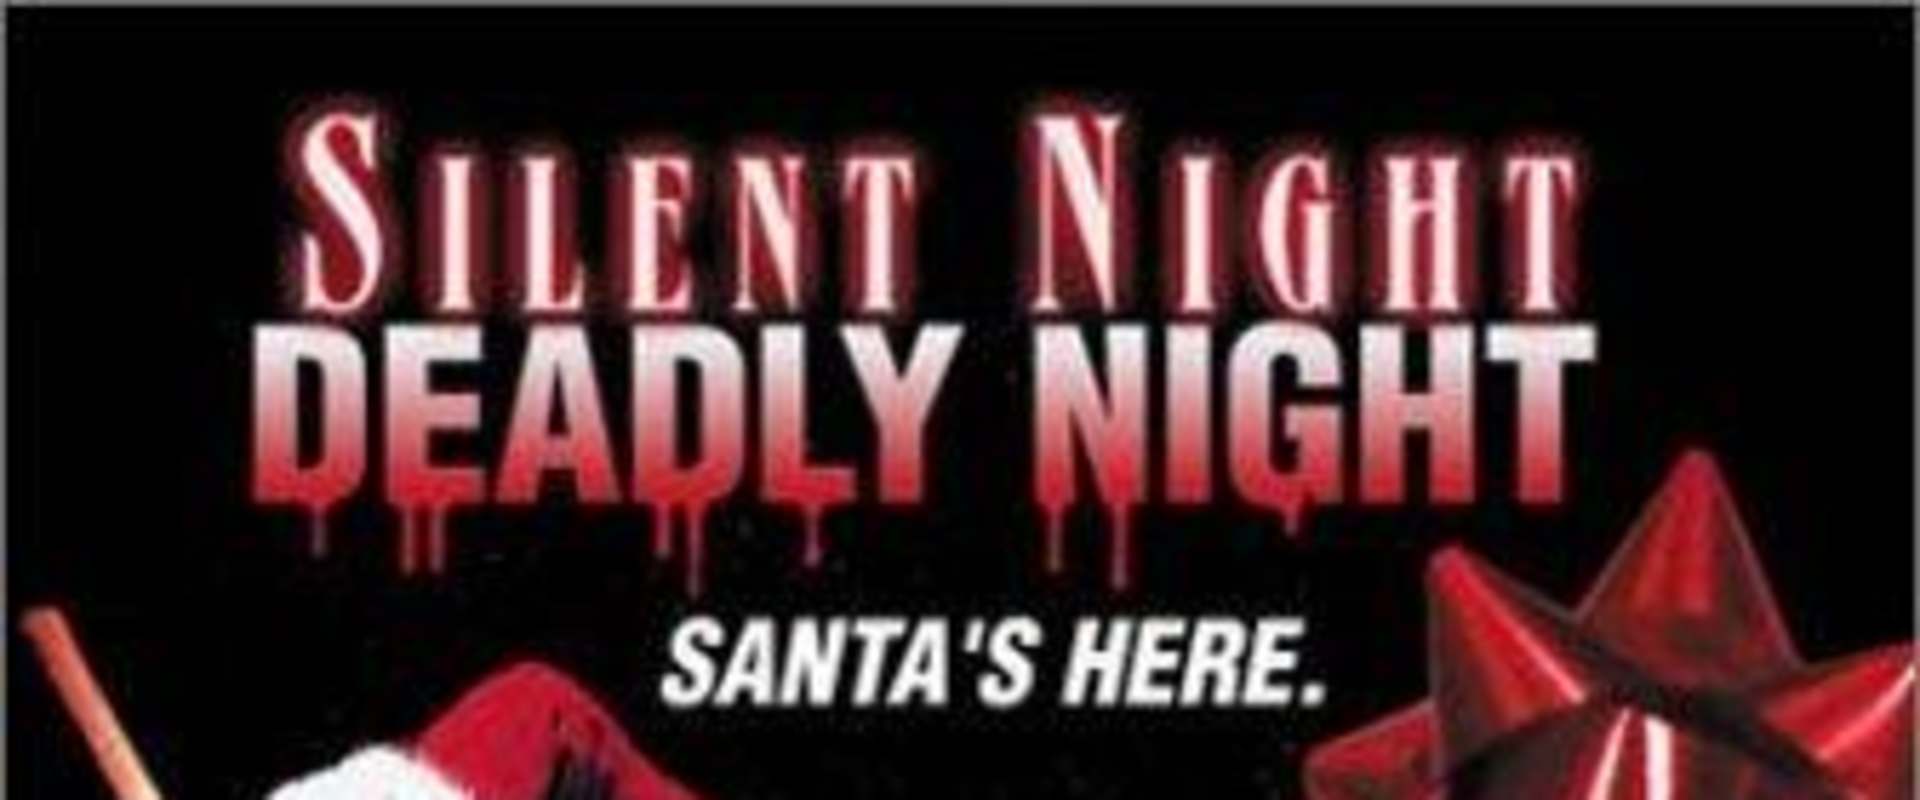 Silent Night, Deadly Night Part 2 background 1